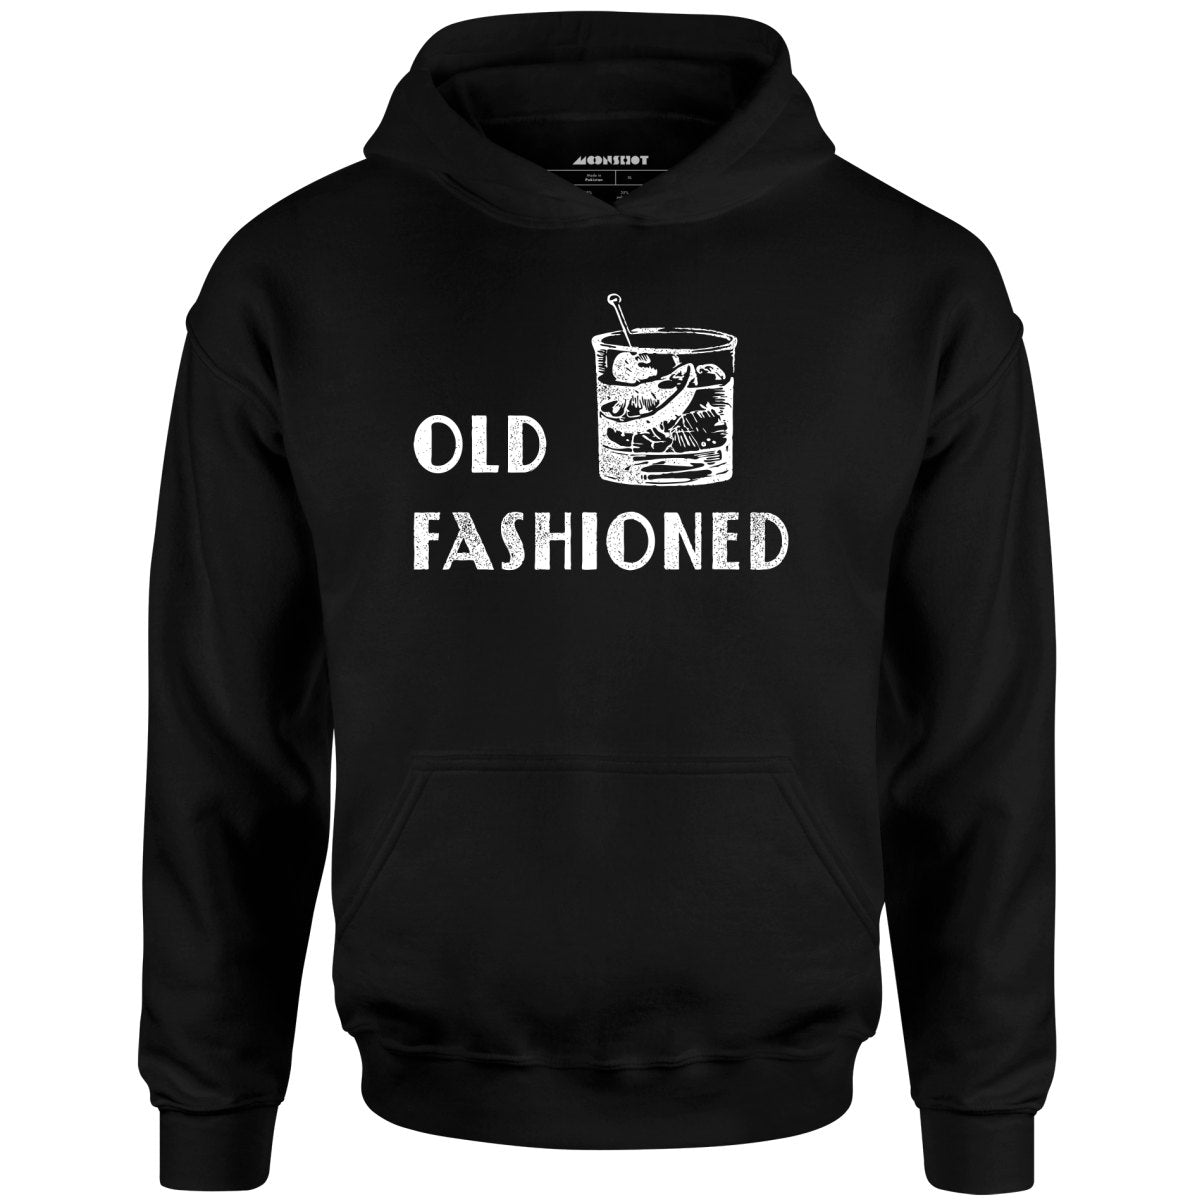 Old Fashioned - Unisex Hoodie